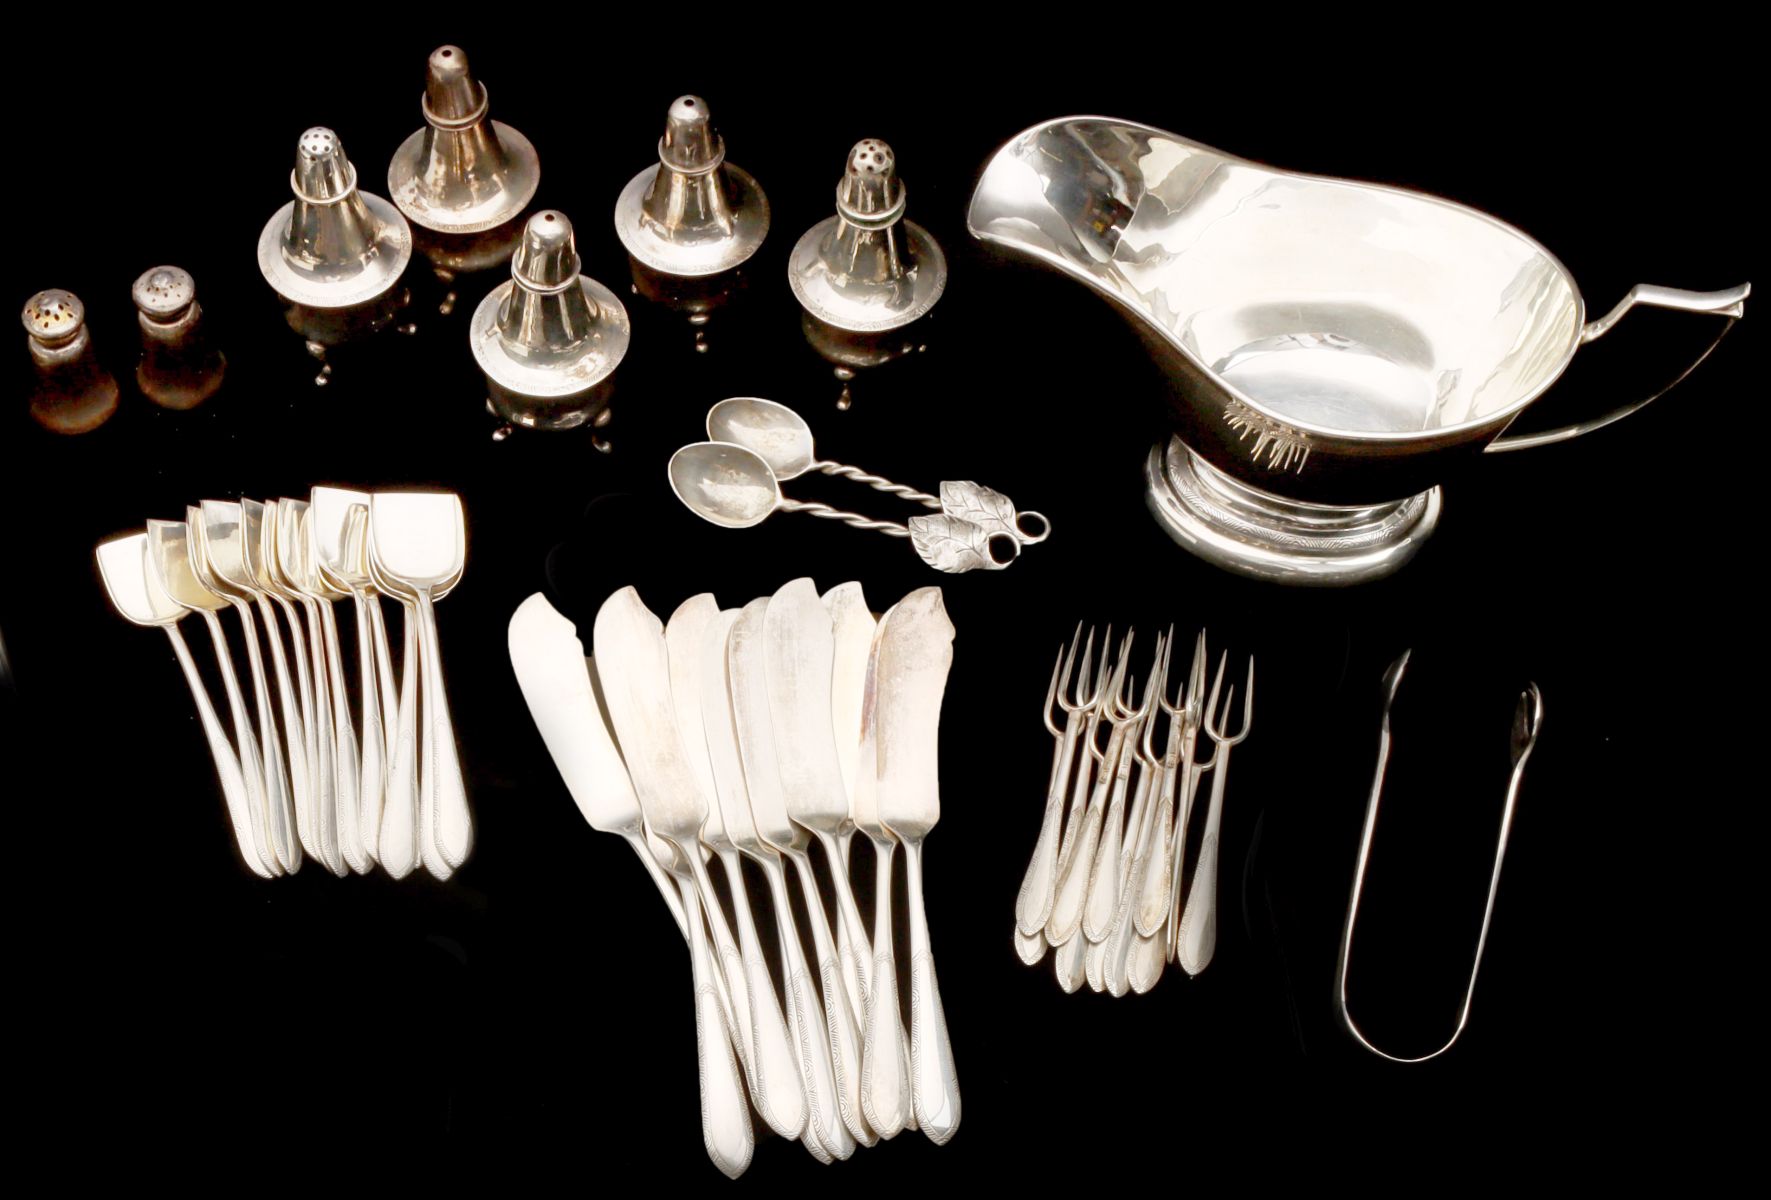 A LARGE HAND WROUGHT STERLING SILVER FLATWARE SERVICE